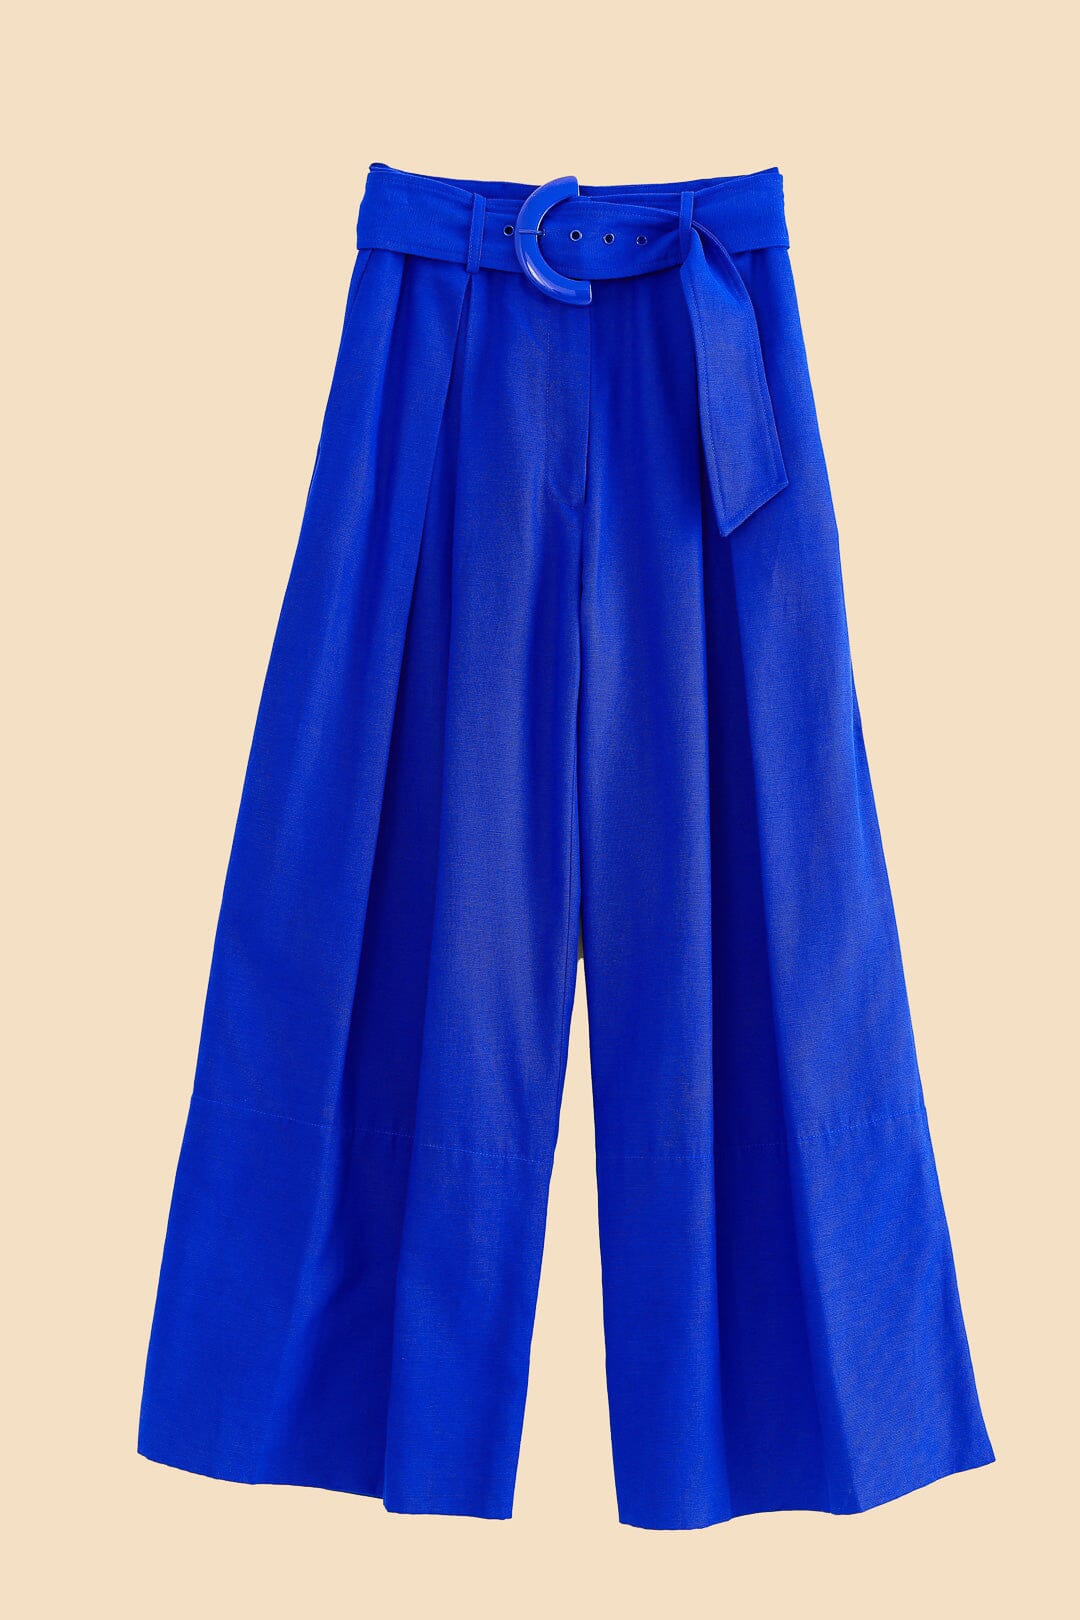 Bright Blue Tailored Pants